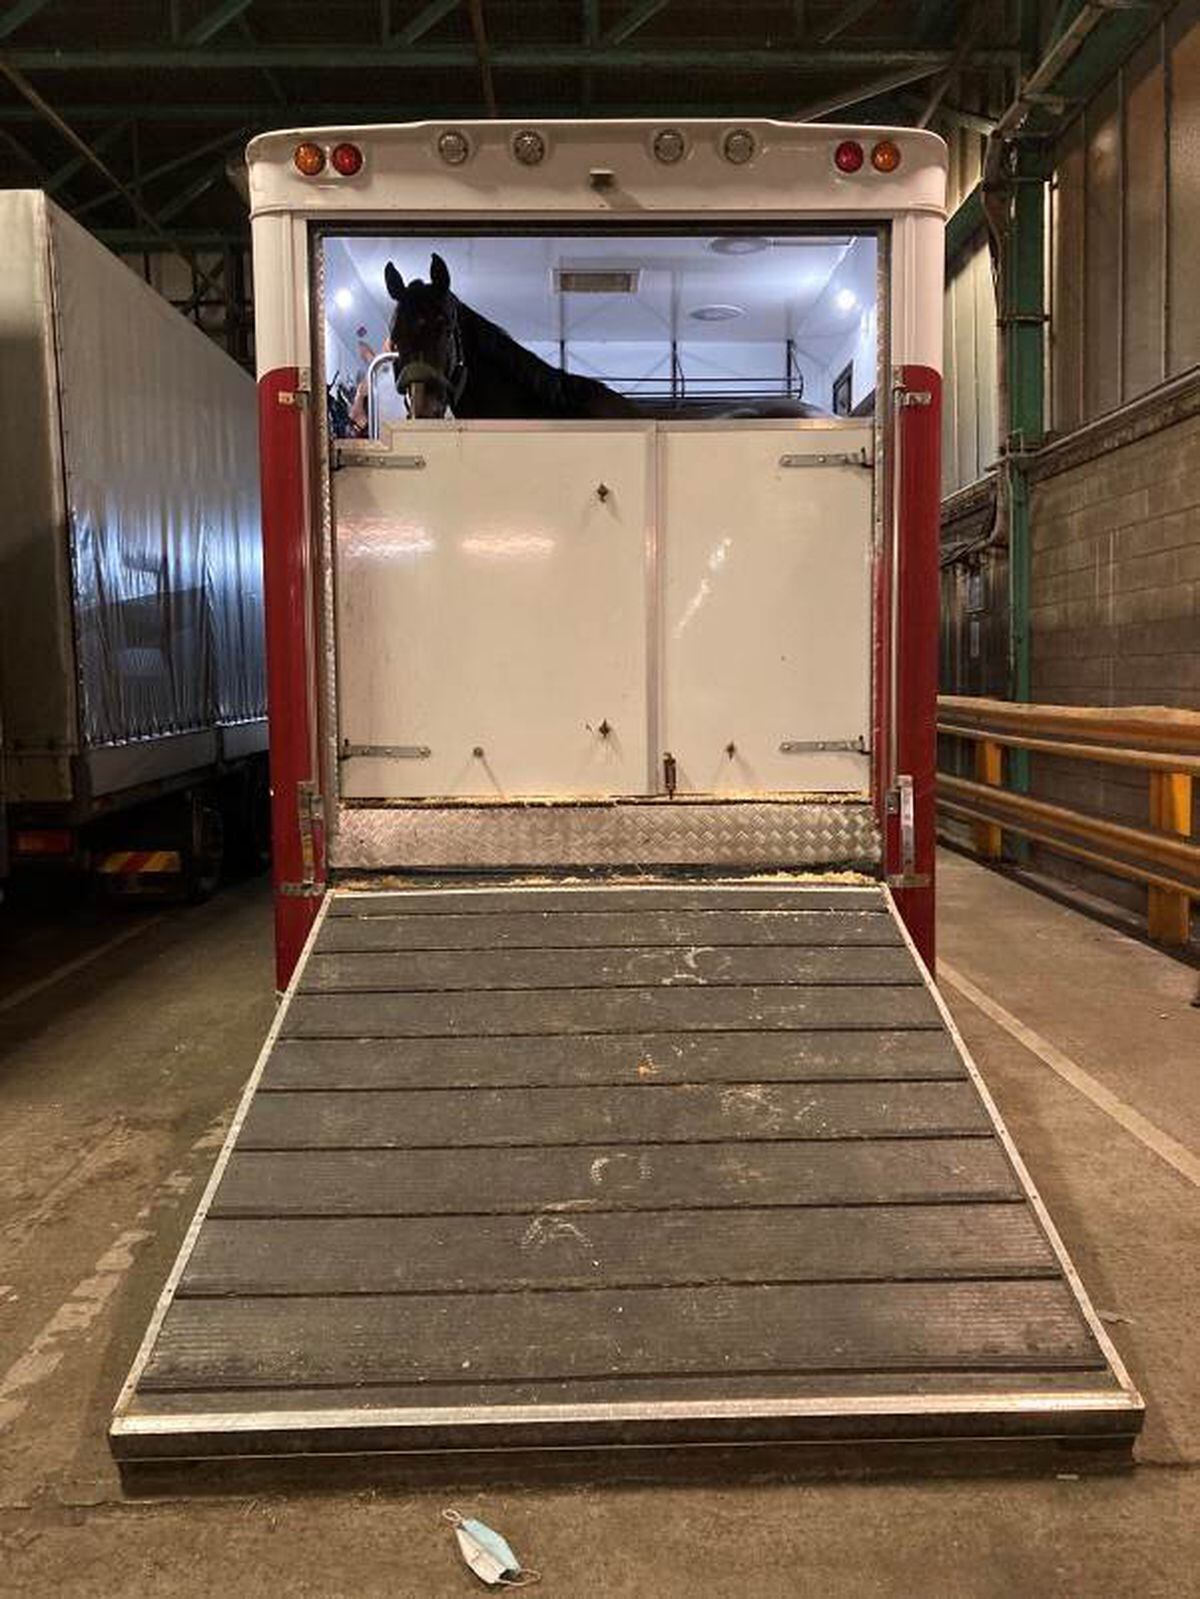 The horse transporter the drugs were found in. Photo: National Crime Agency